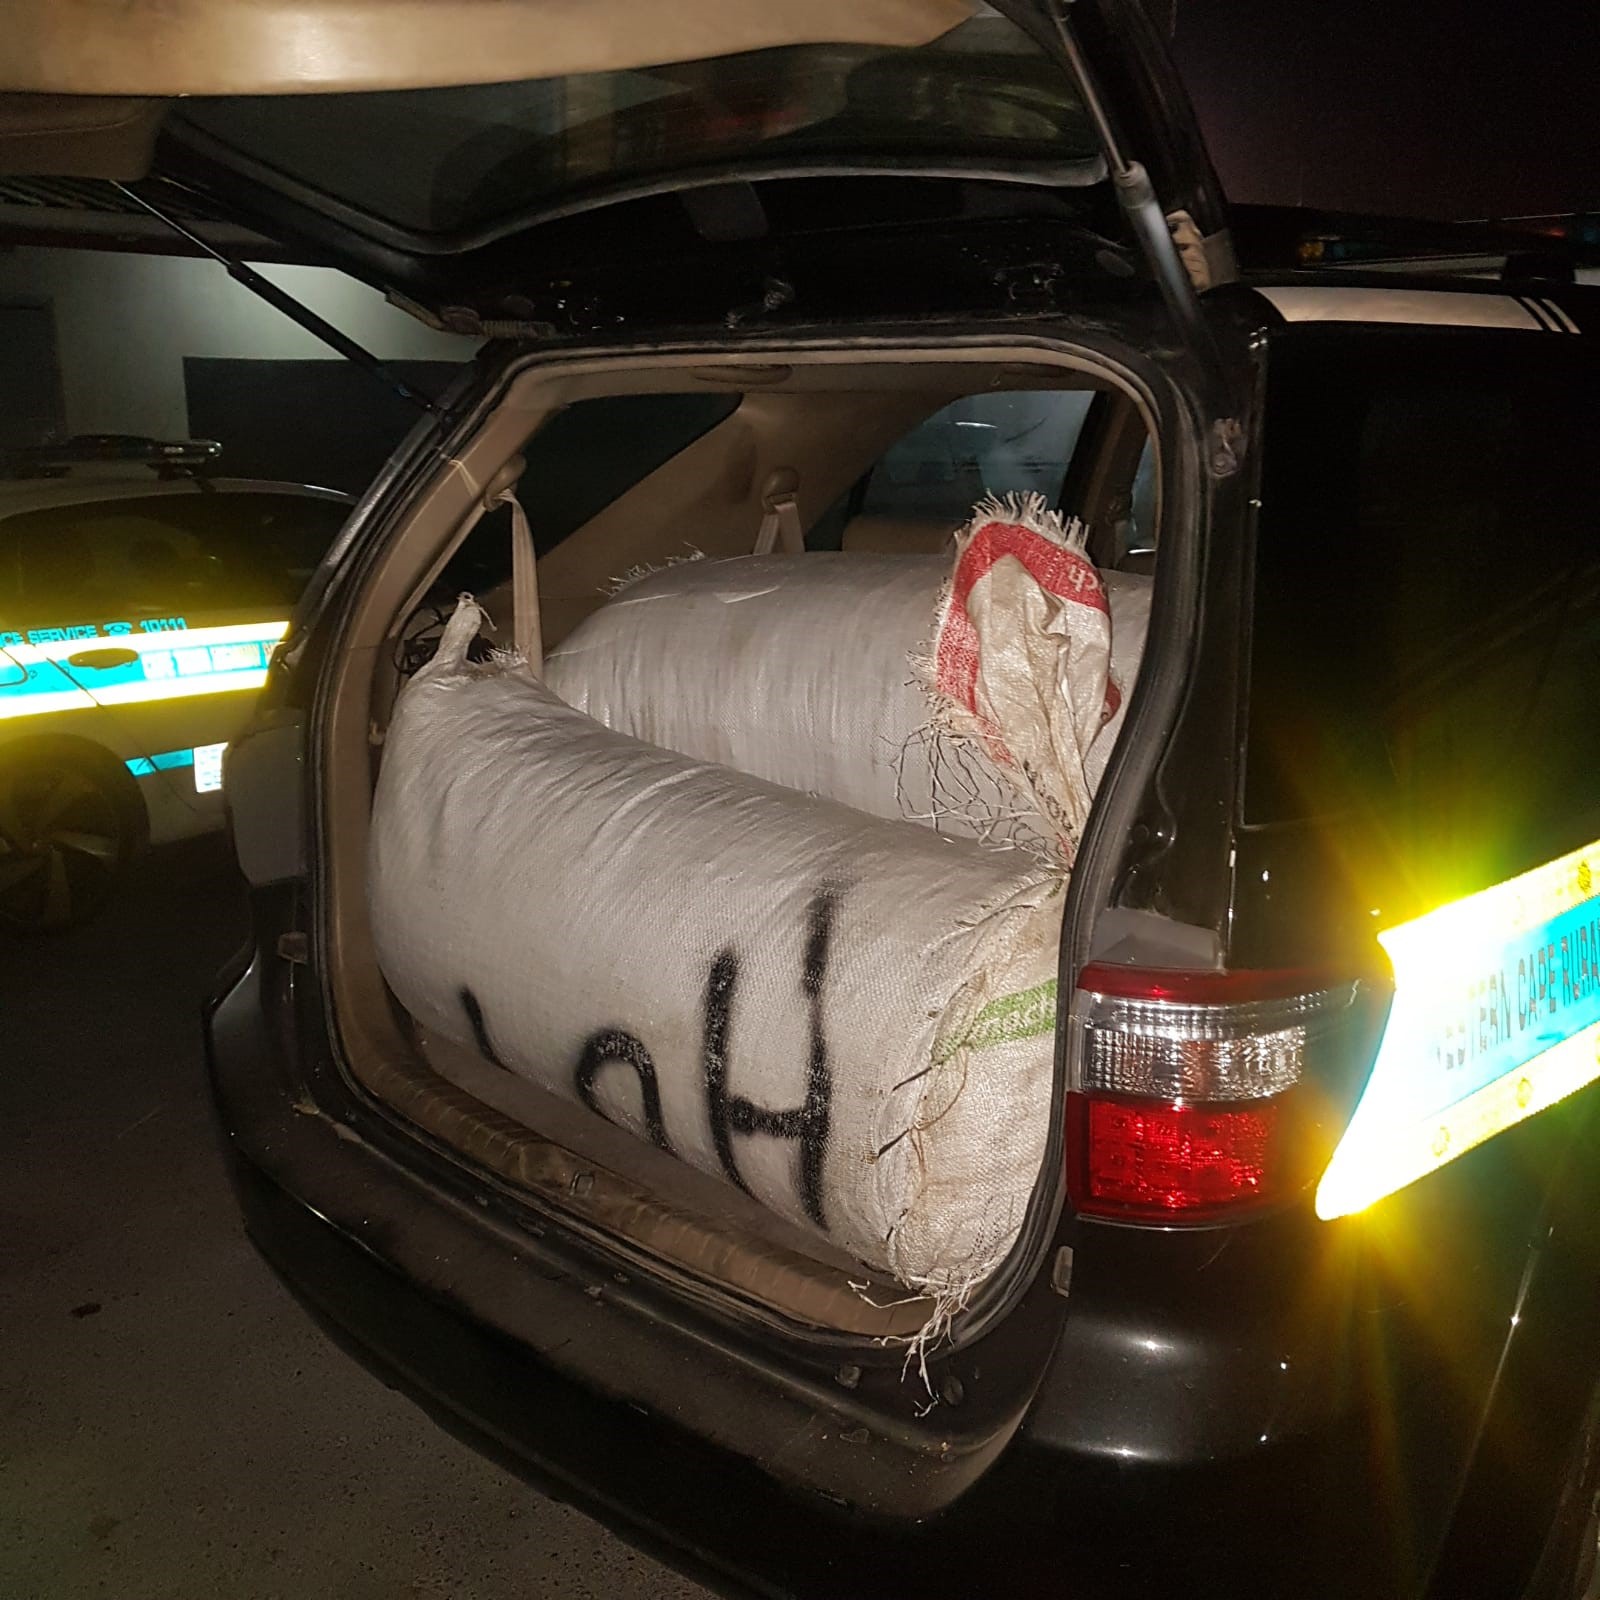 Drugs, ammunition and livestock confiscated, five arrested